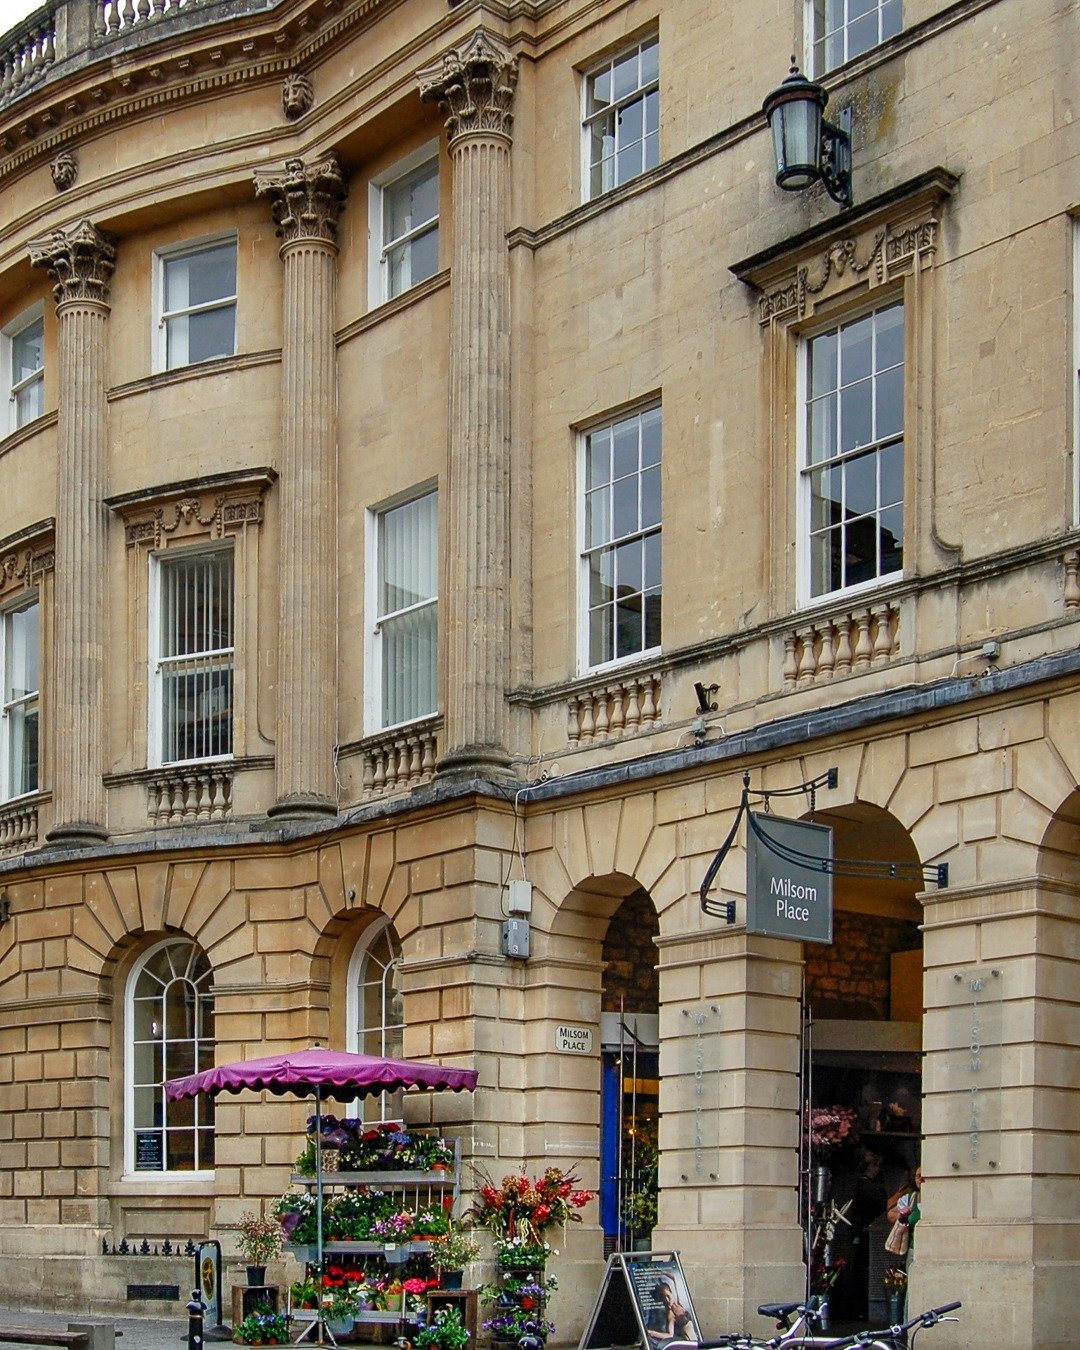 ~
.
.
The Little Flower Stand
.
.
This image caught my eye because of how the diminutive little flower stand, with its purple shade umbrella, was simply dwarfed by the impressive architecture of this beautiful building in Bath, England. The umbrella 